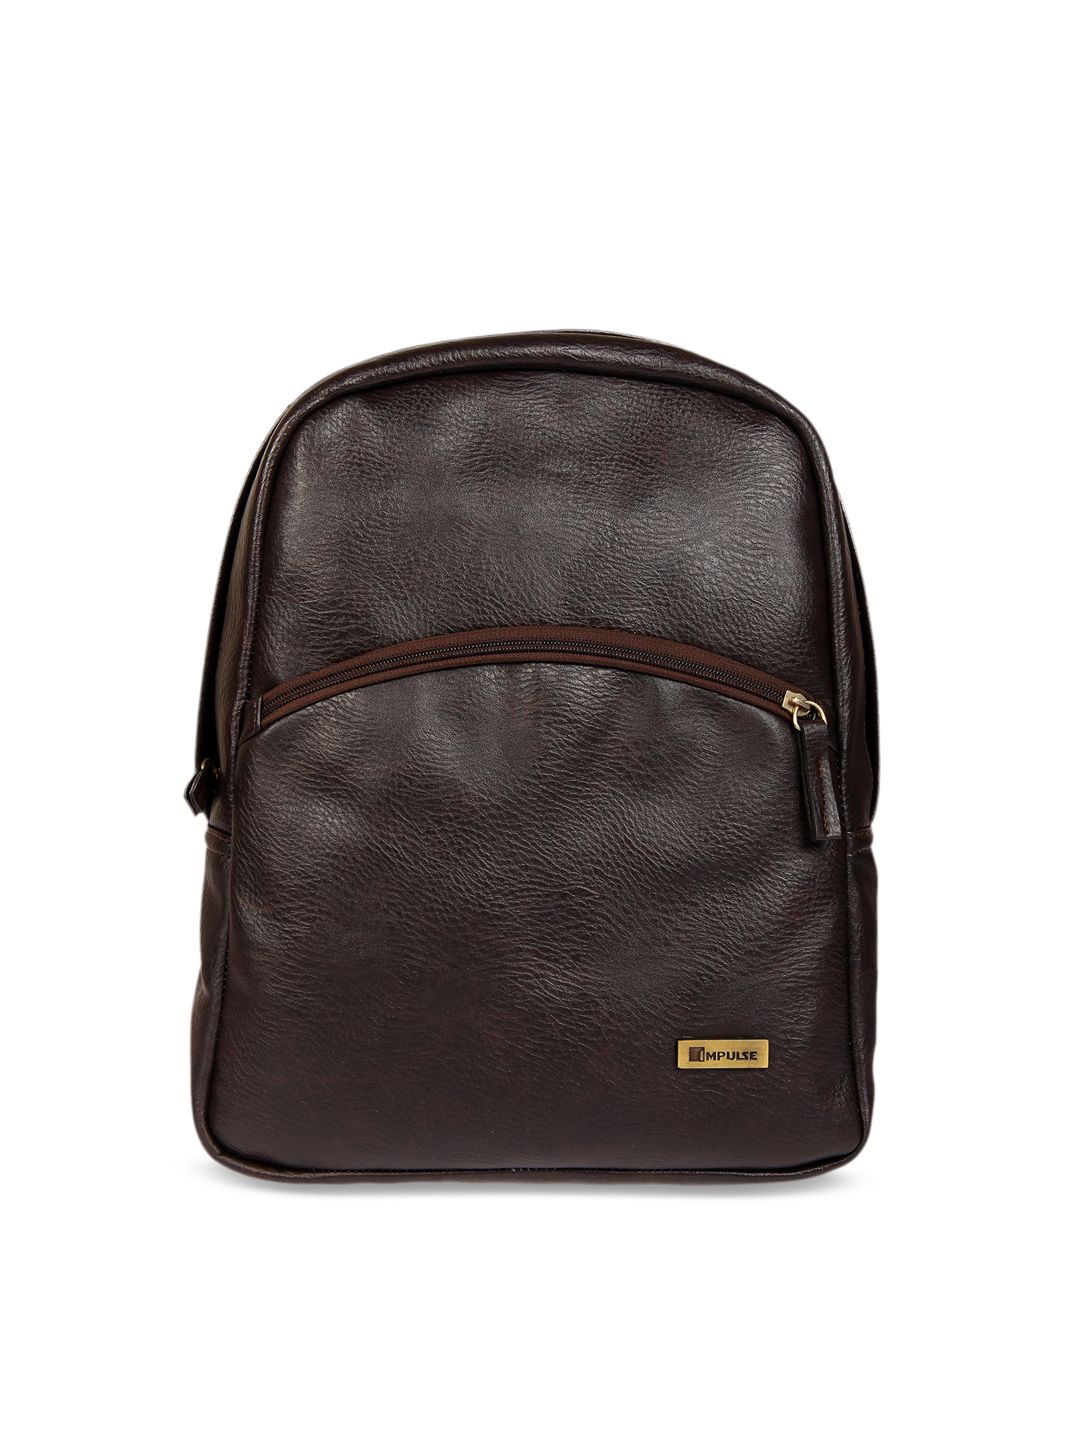 Impulse Women Brown Solid Backpack Price in India